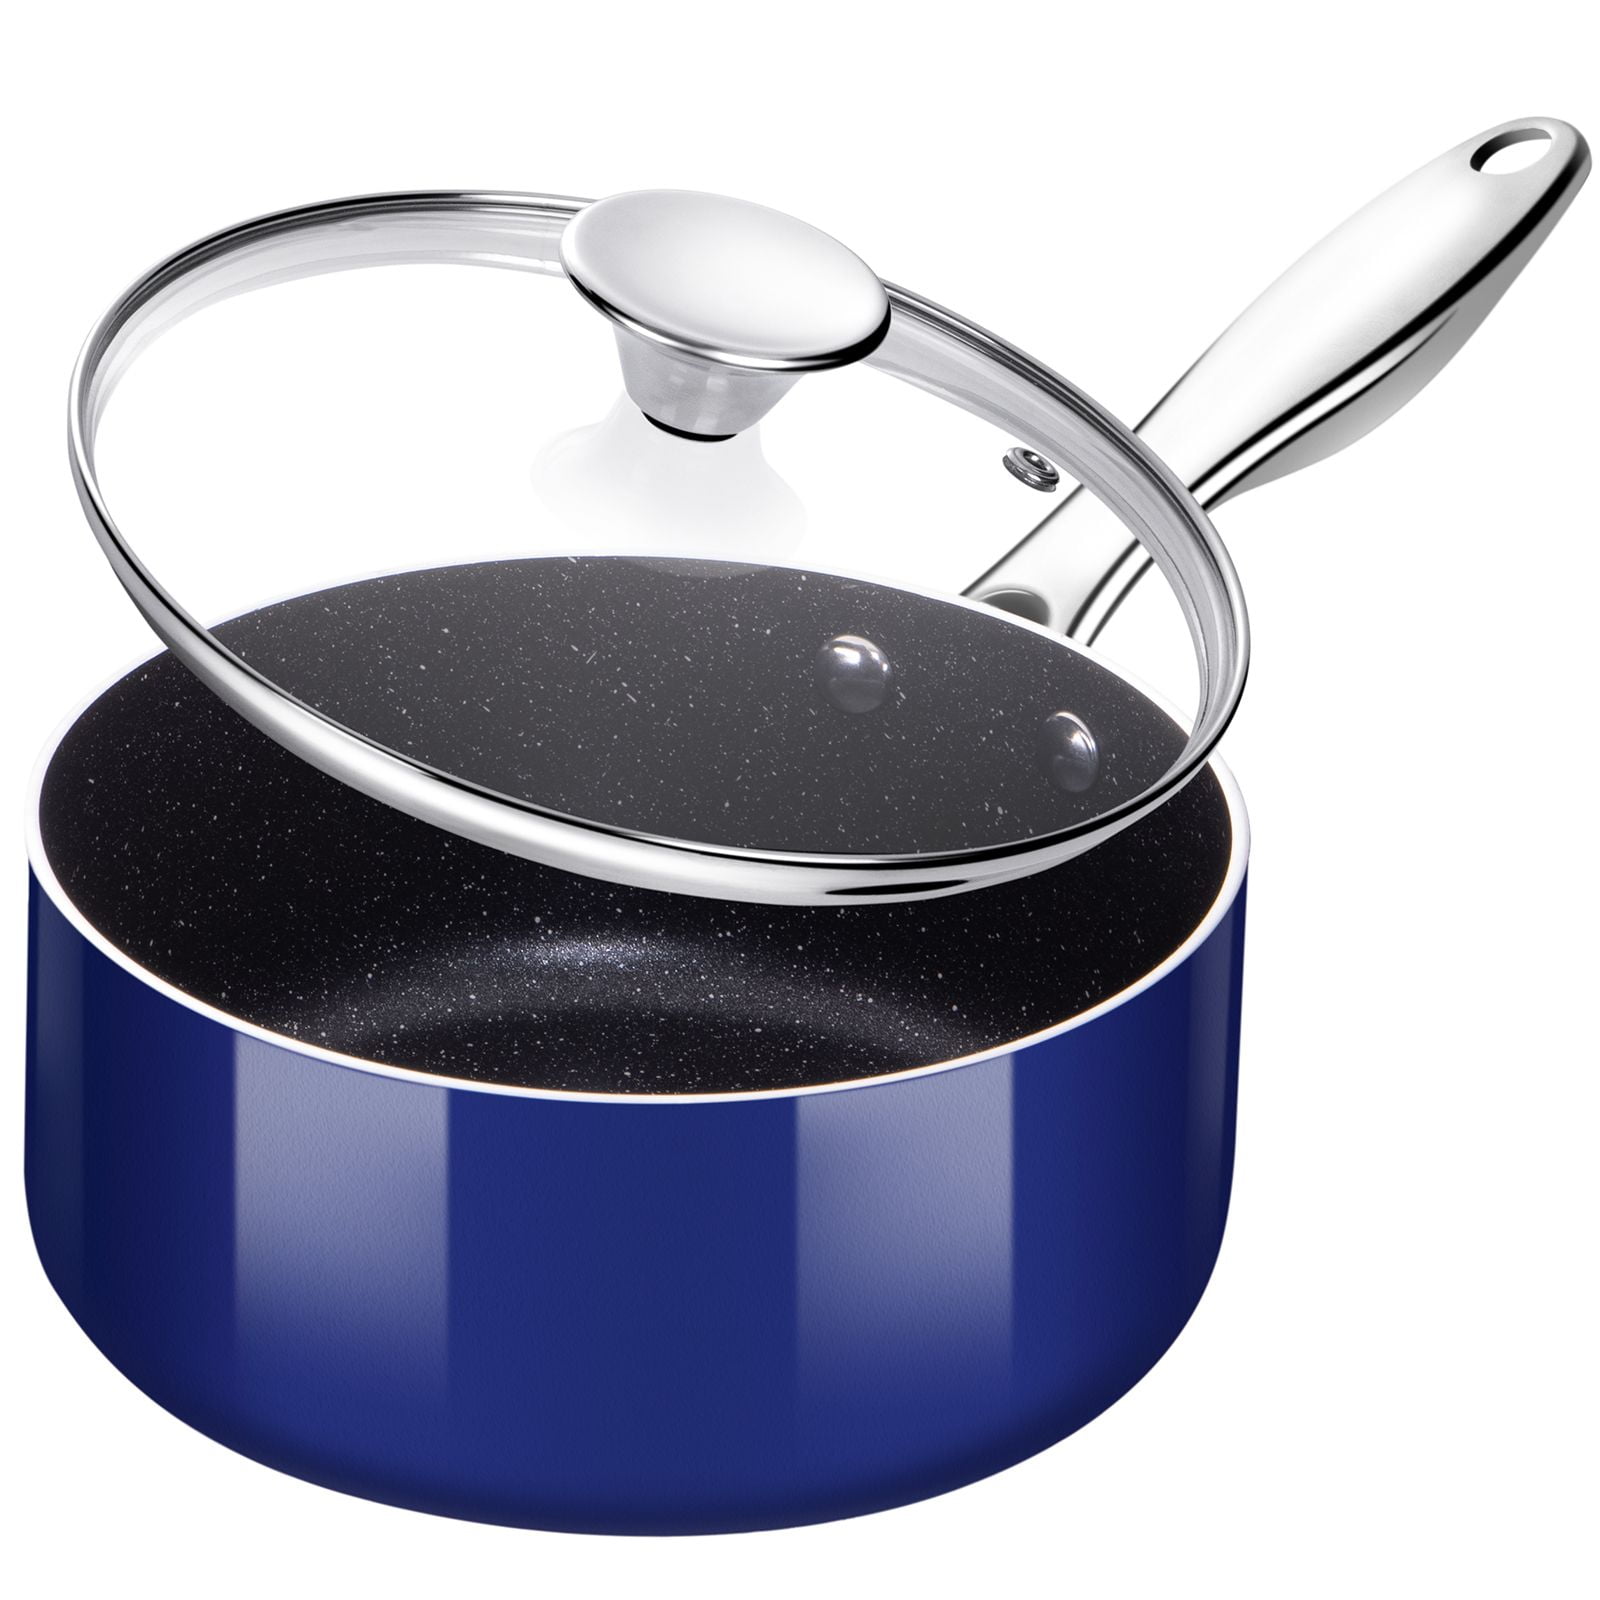 Small Saucepan with Lid, E-far Stainless Steel Max Capacity 2 Quart Sauce  Pot with Glass Lid for Cooking, Easy Clean & Rust Free, Dishwasher Safe